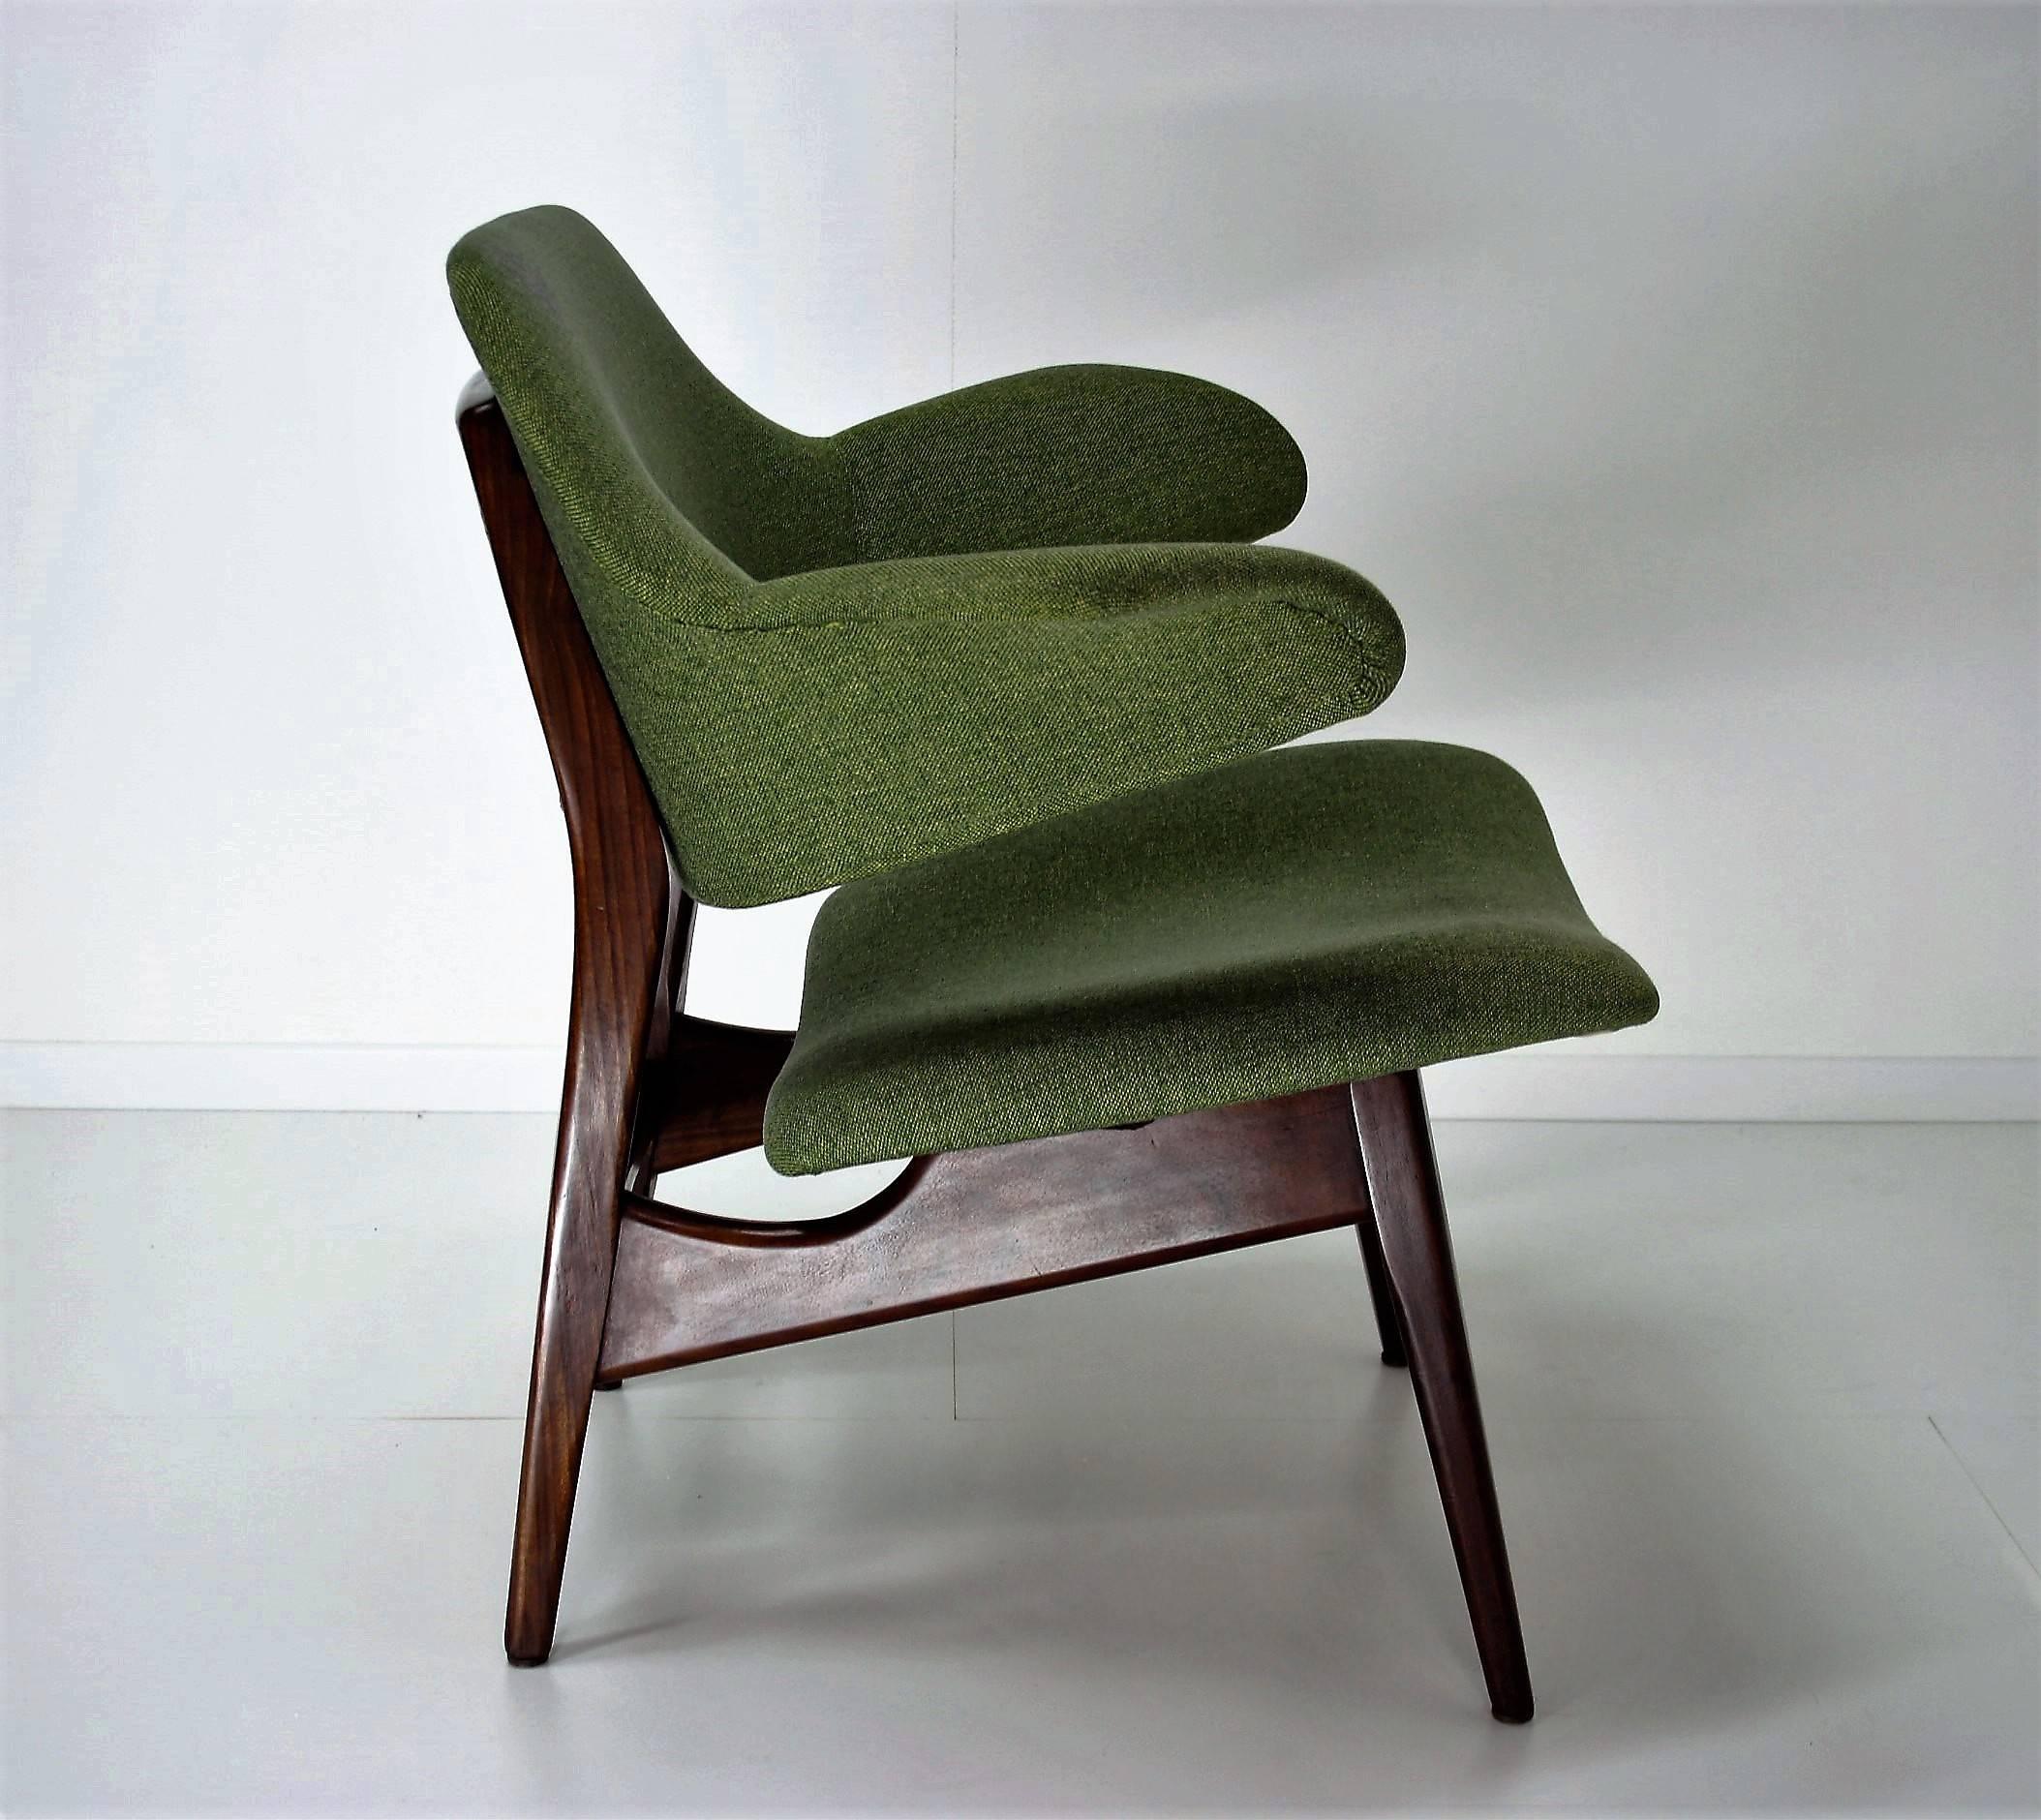 Very confortable club chair by Louis Van Teeffelen for Webe, 1960s.
The seating was upholstered a few years ago but still in good condition.